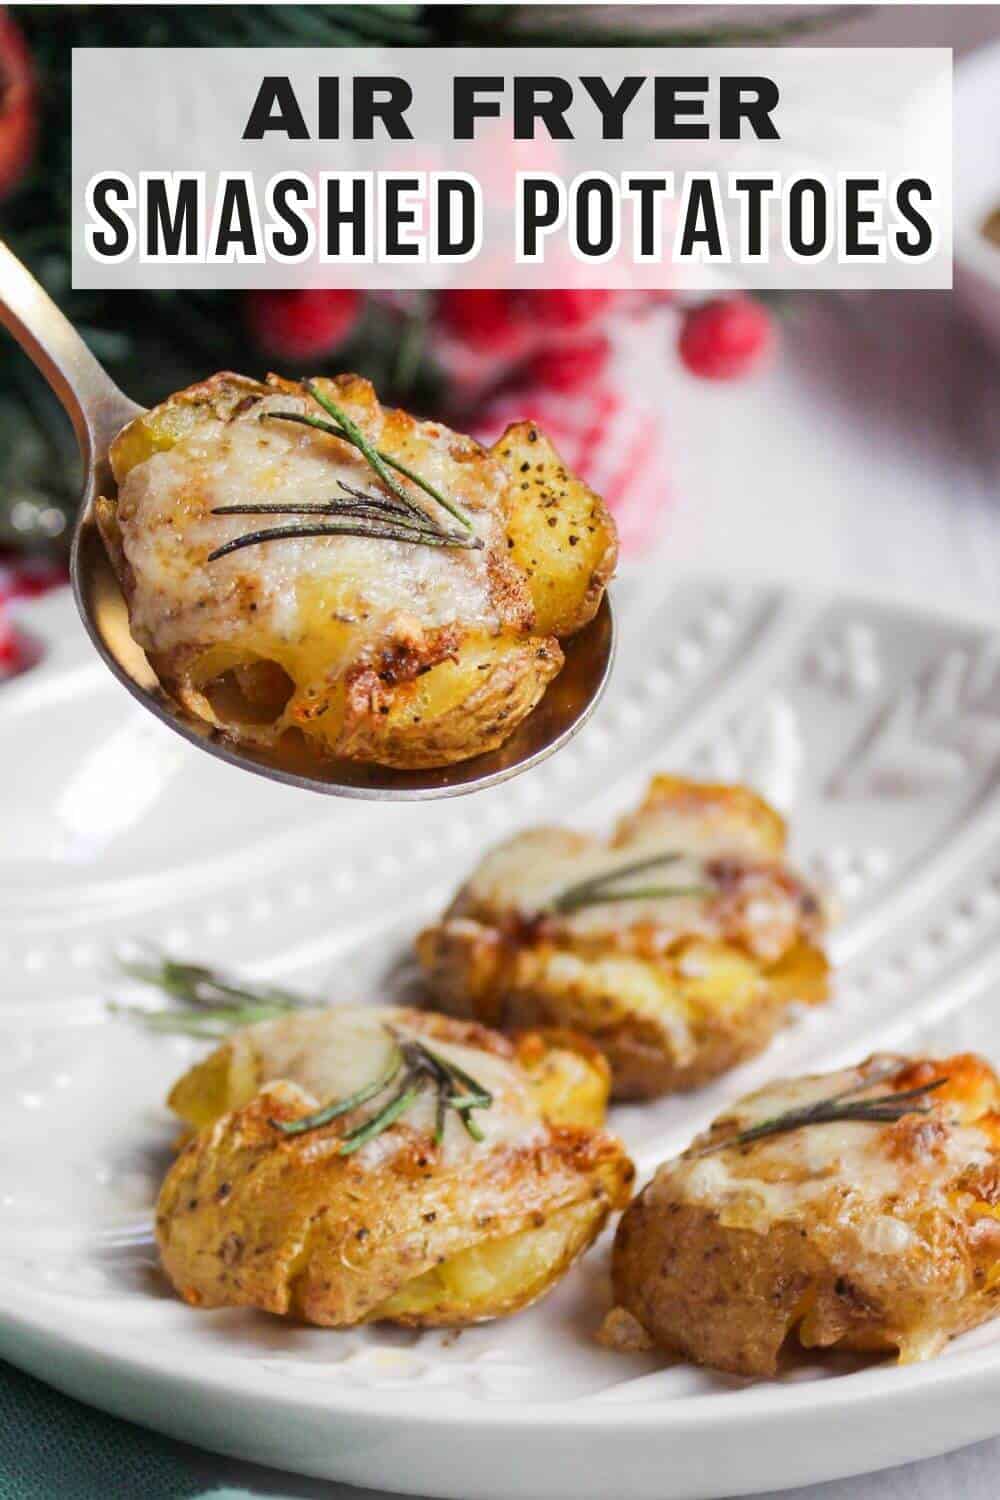 Air fryer smashed potatoes with rosemary.